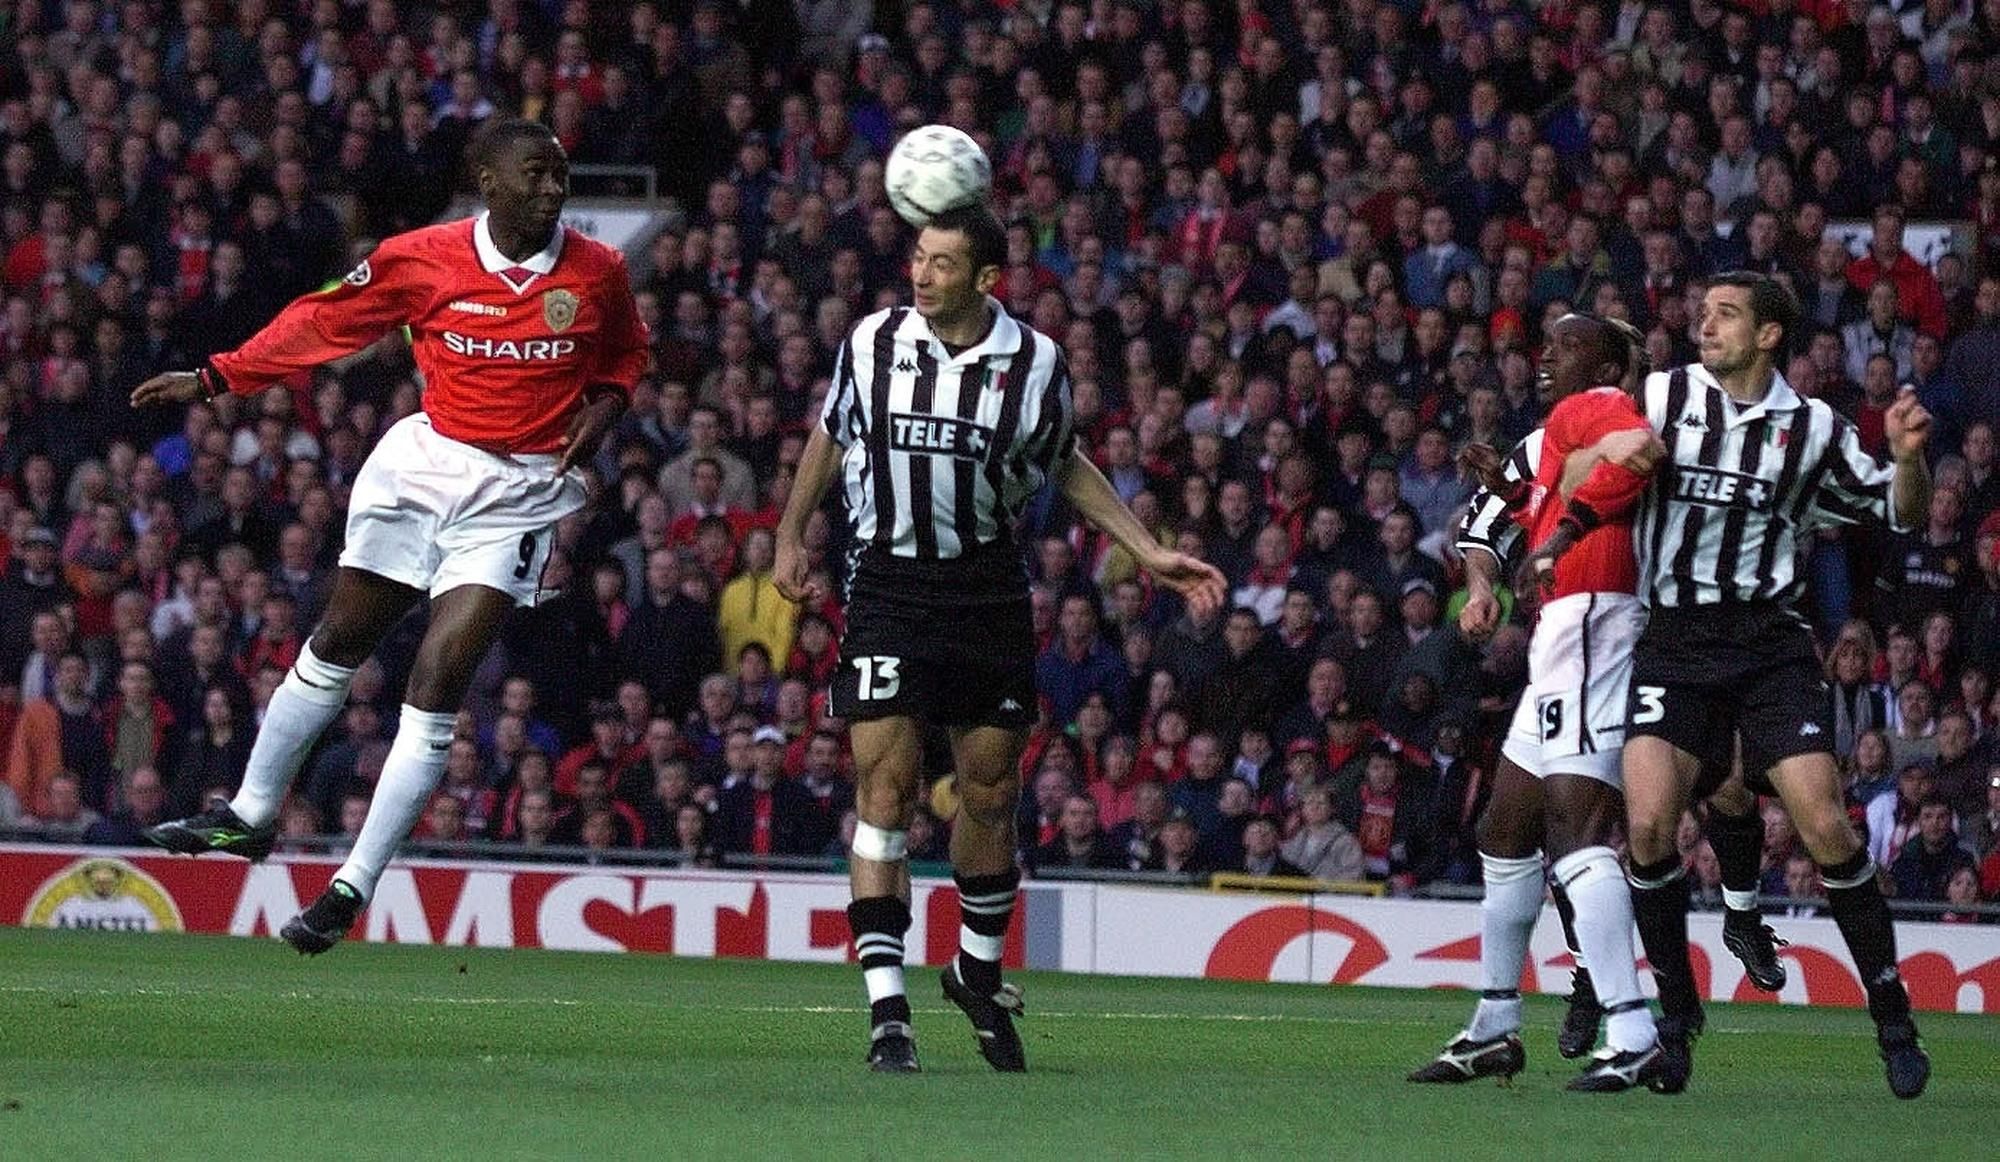 Manchester United v Juventus April 1999 European Cup Semi Final  Andy Cole of United heads ball towards goal during last nights 1-1 draw at Old Trafford

weby